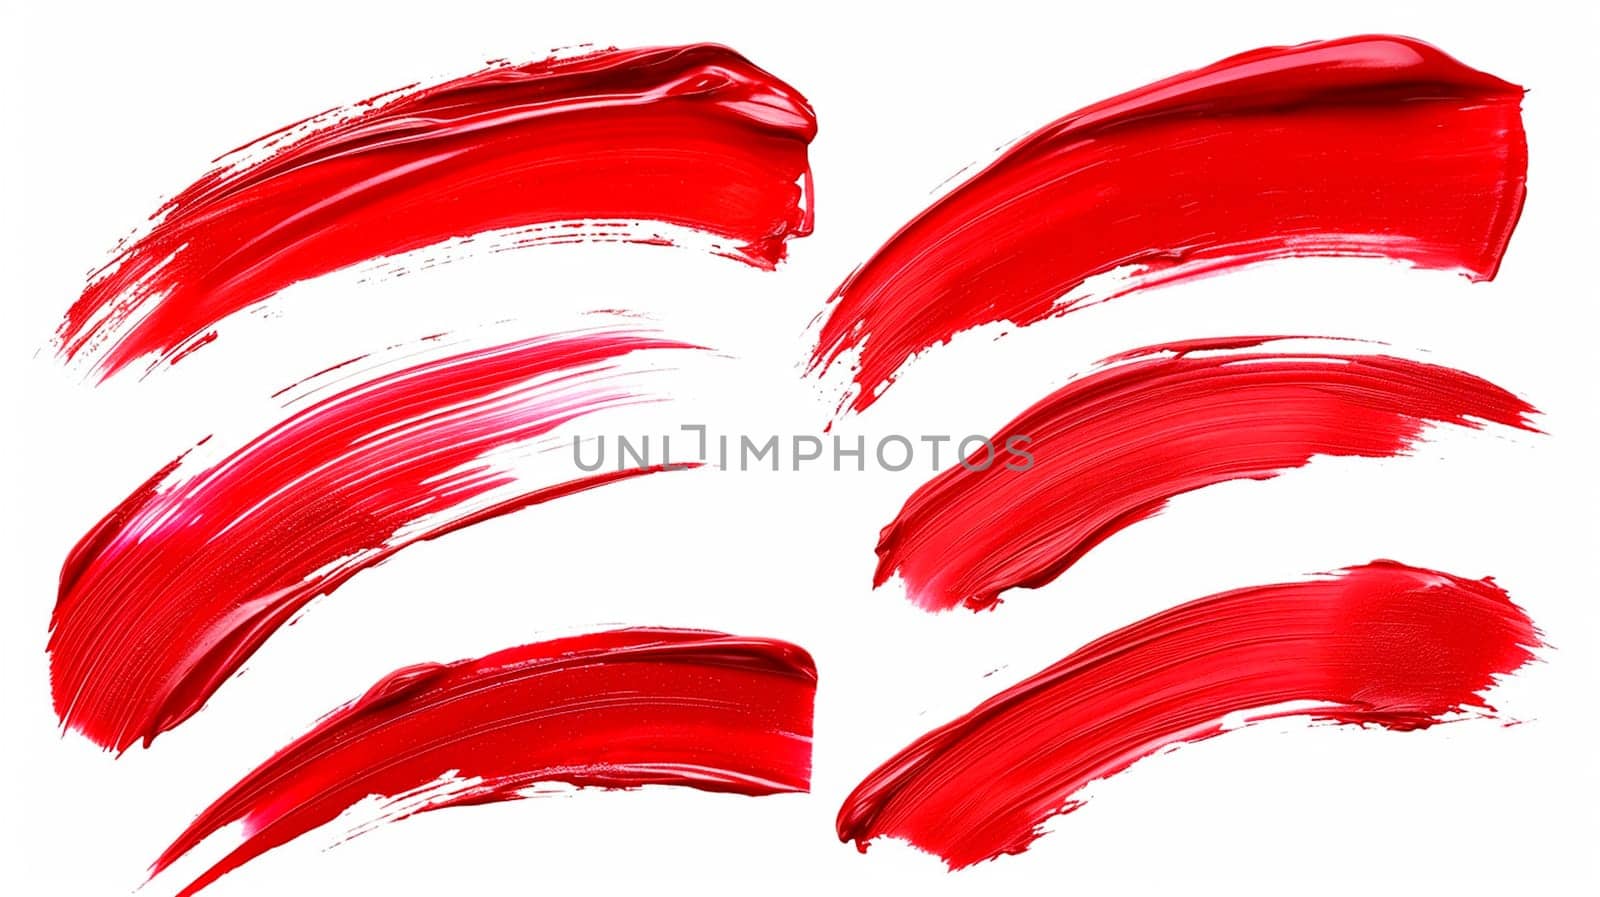 Lipstick strokes isolate on a white background. Selective focus. by mila1784